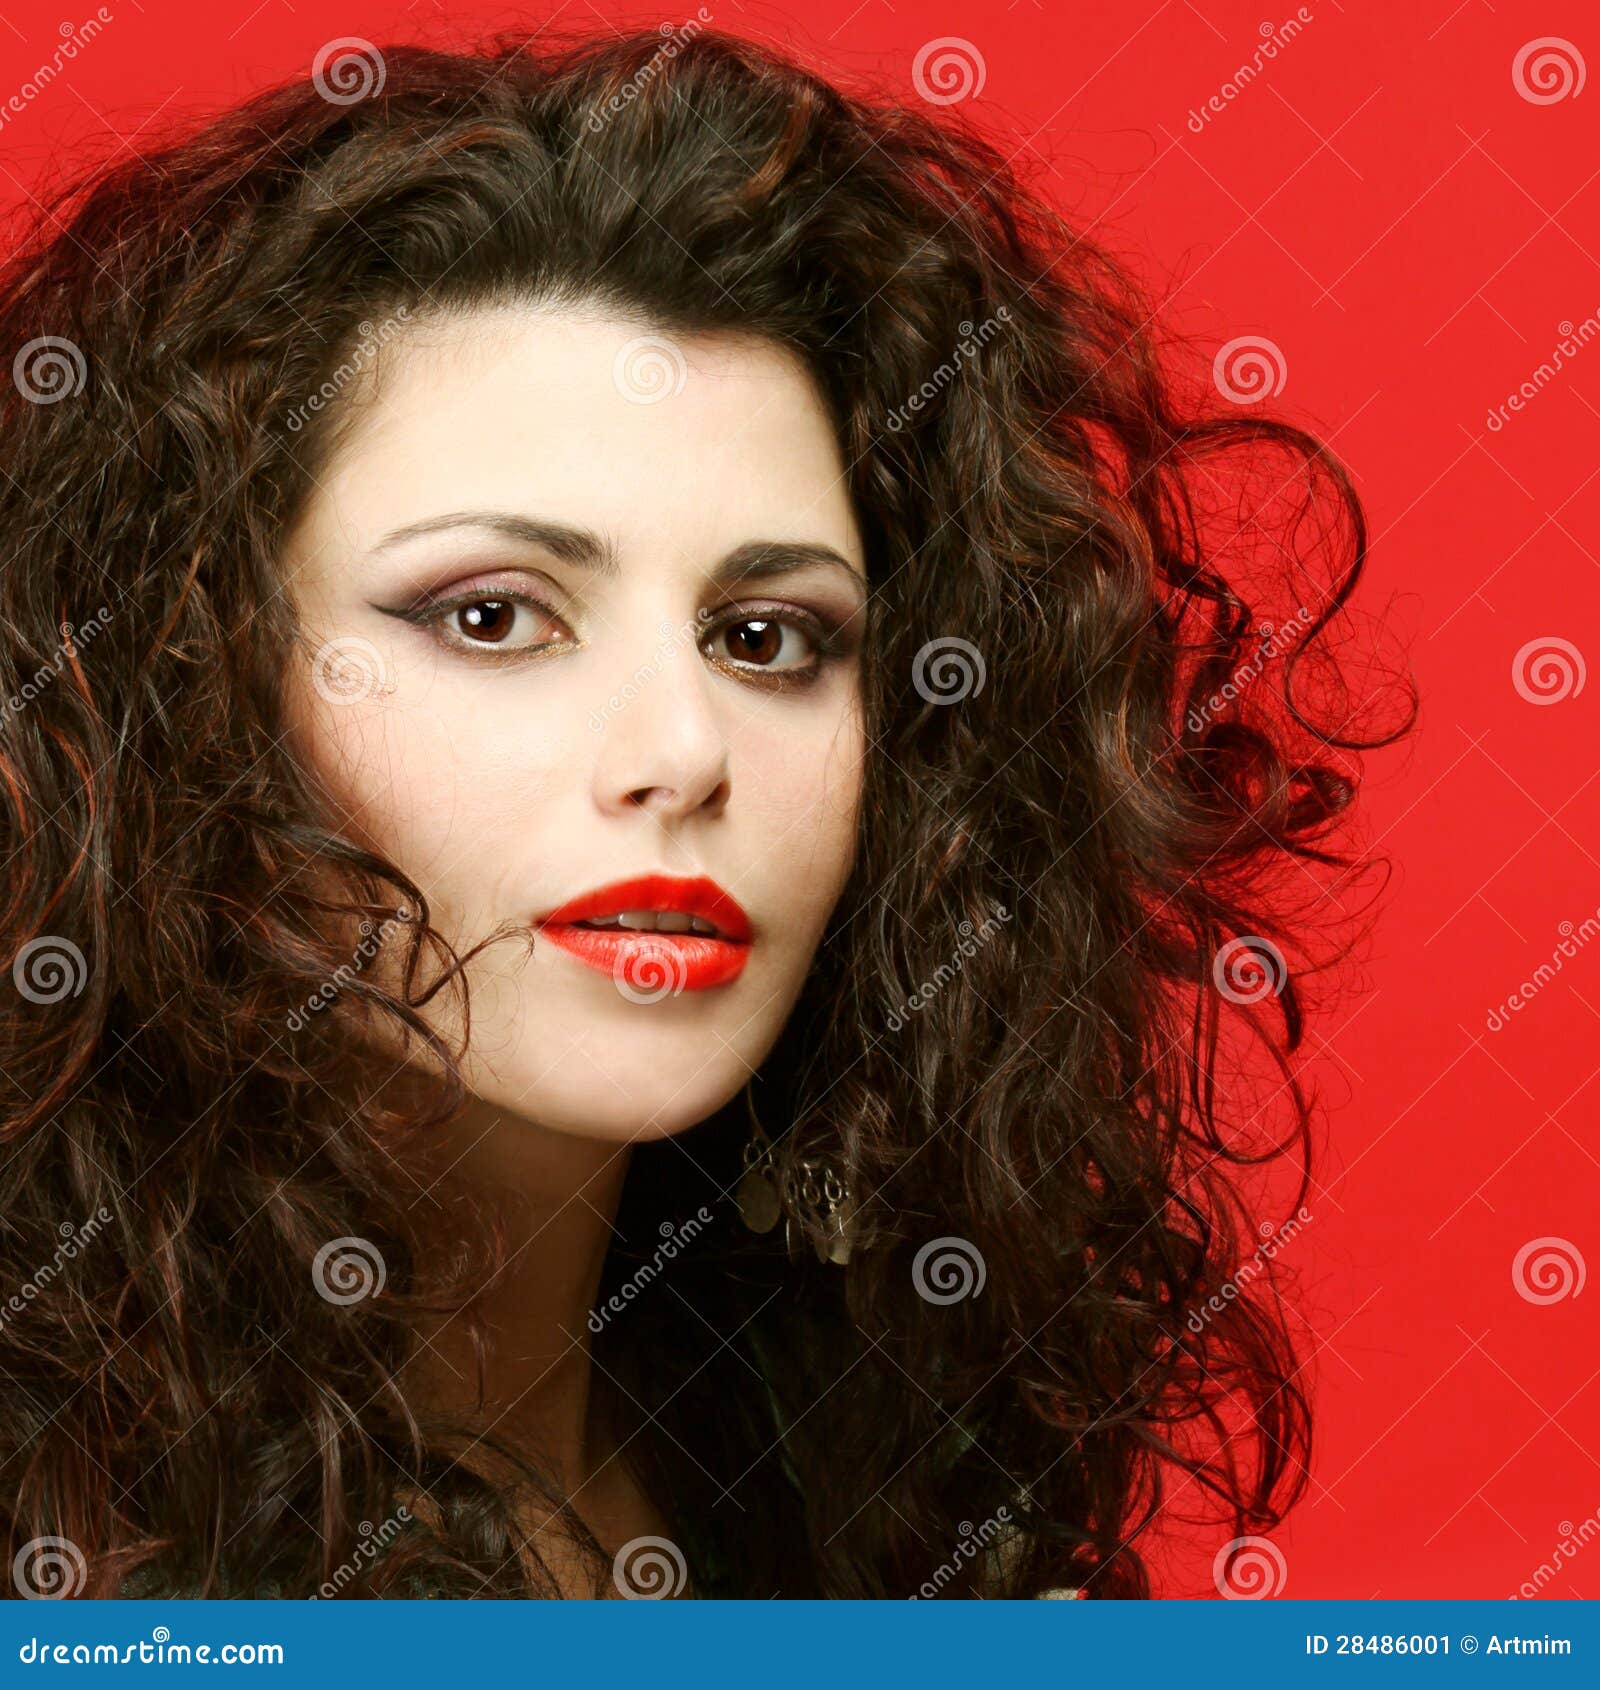 Fashion Model With Makeup And Curly Hair Stock Image